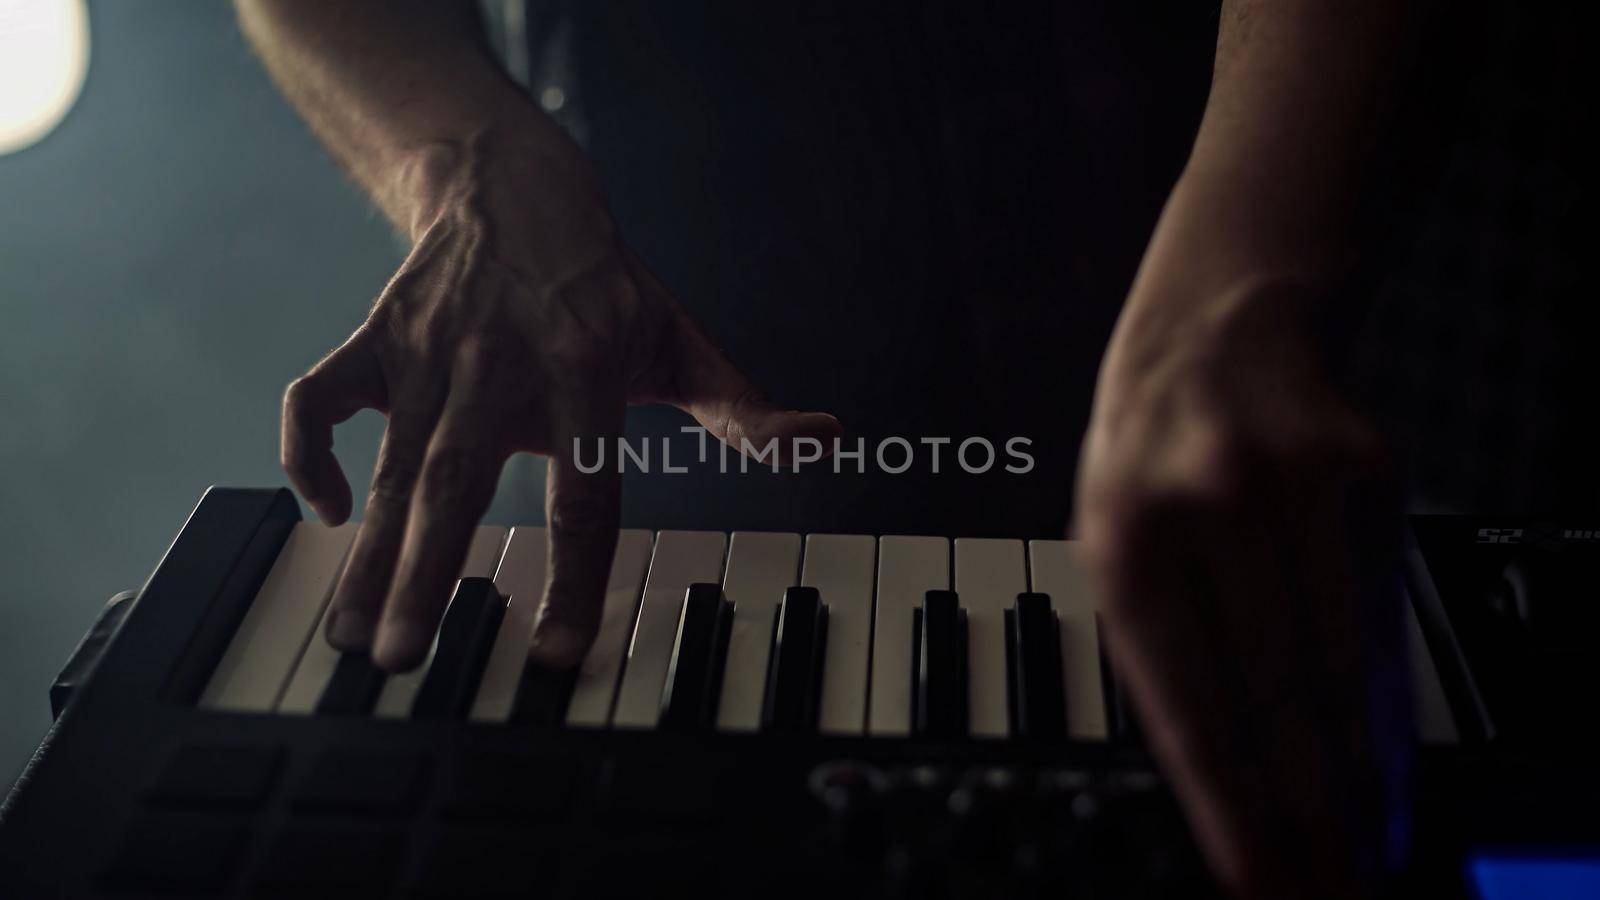 Man plays music using a sampler professional music equipment by pippocarlot